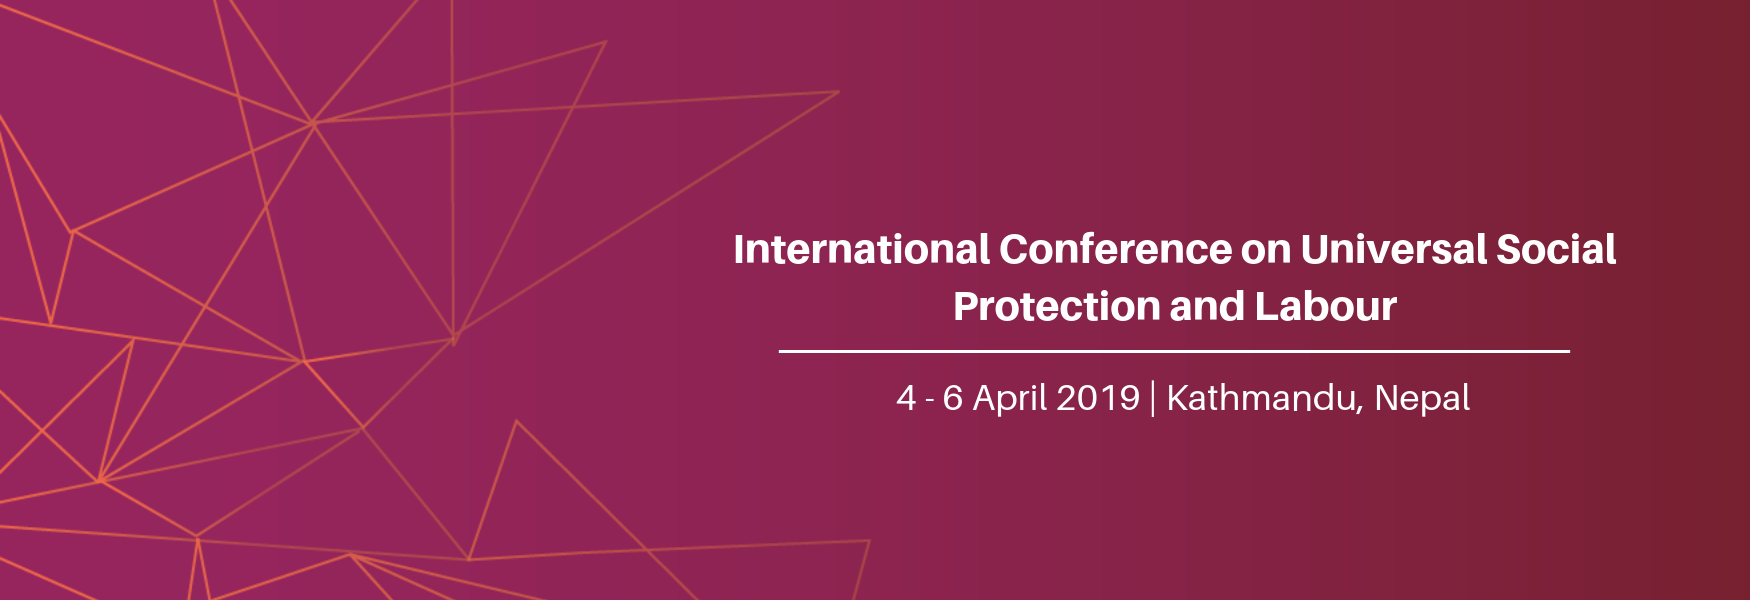 International Conference on Universal Social Protection and Labour